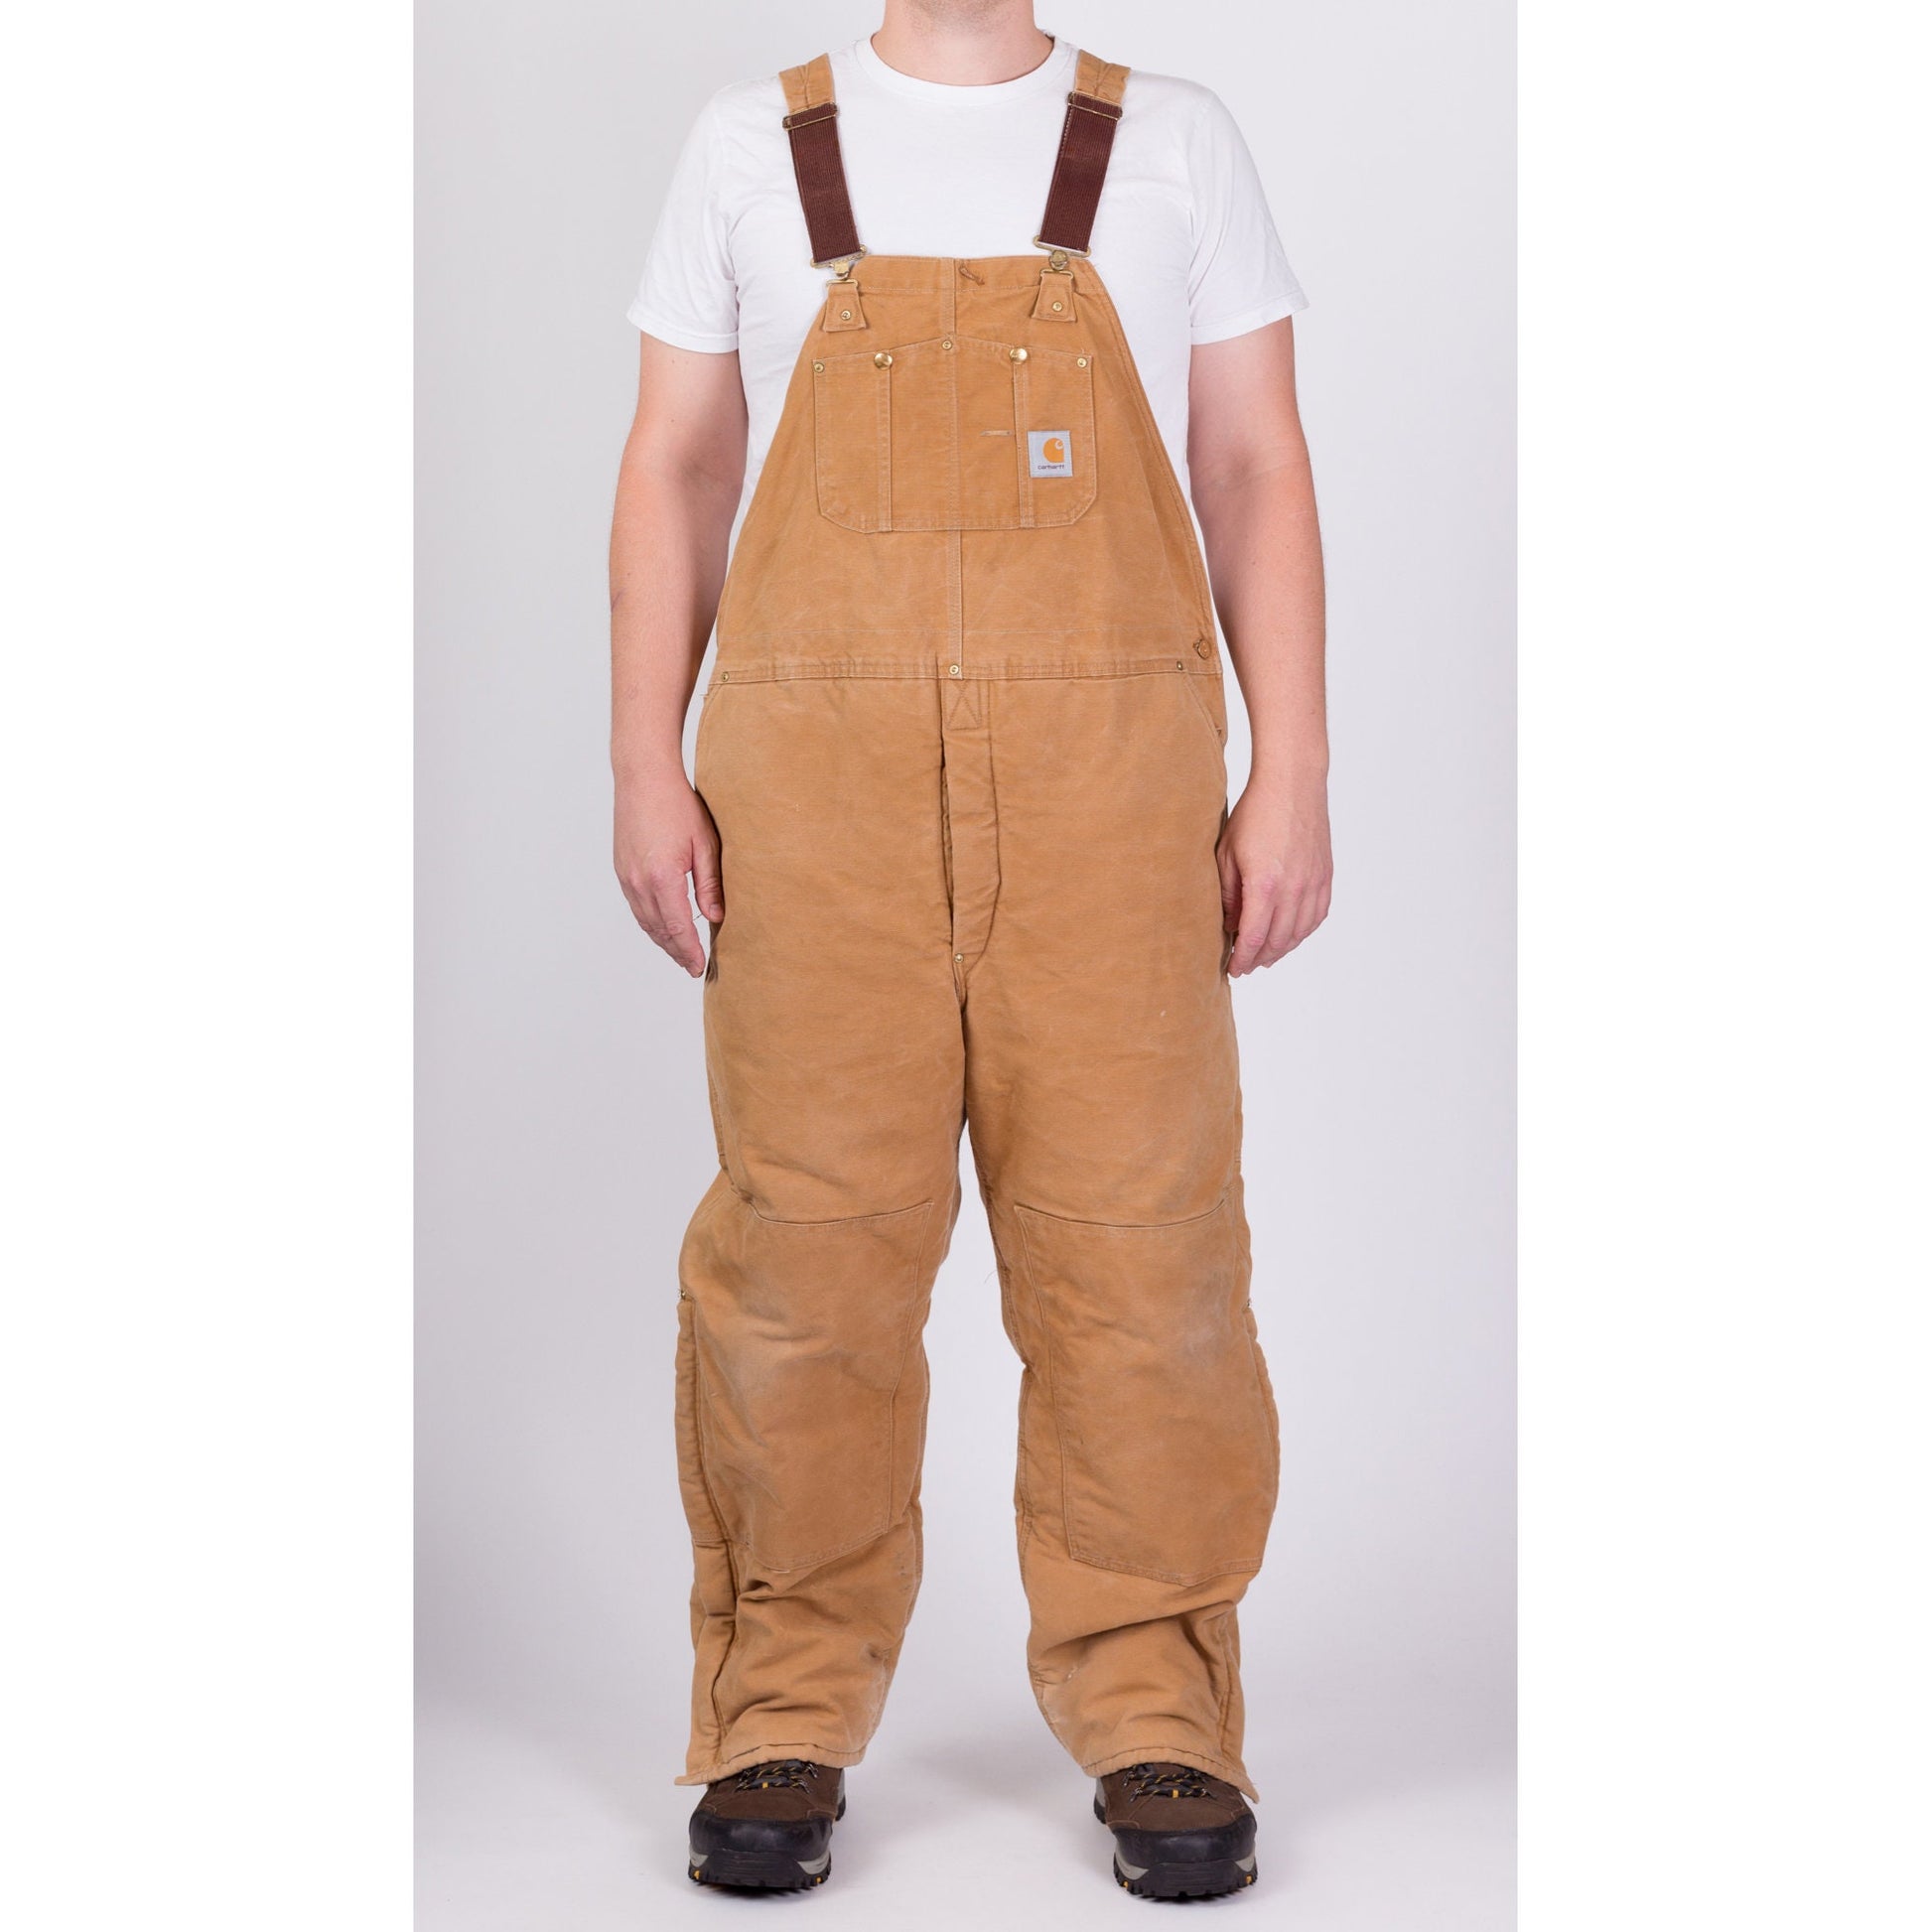 Vintage Carhartt Insulated Quilt Lined Overalls - Men's 2XL 